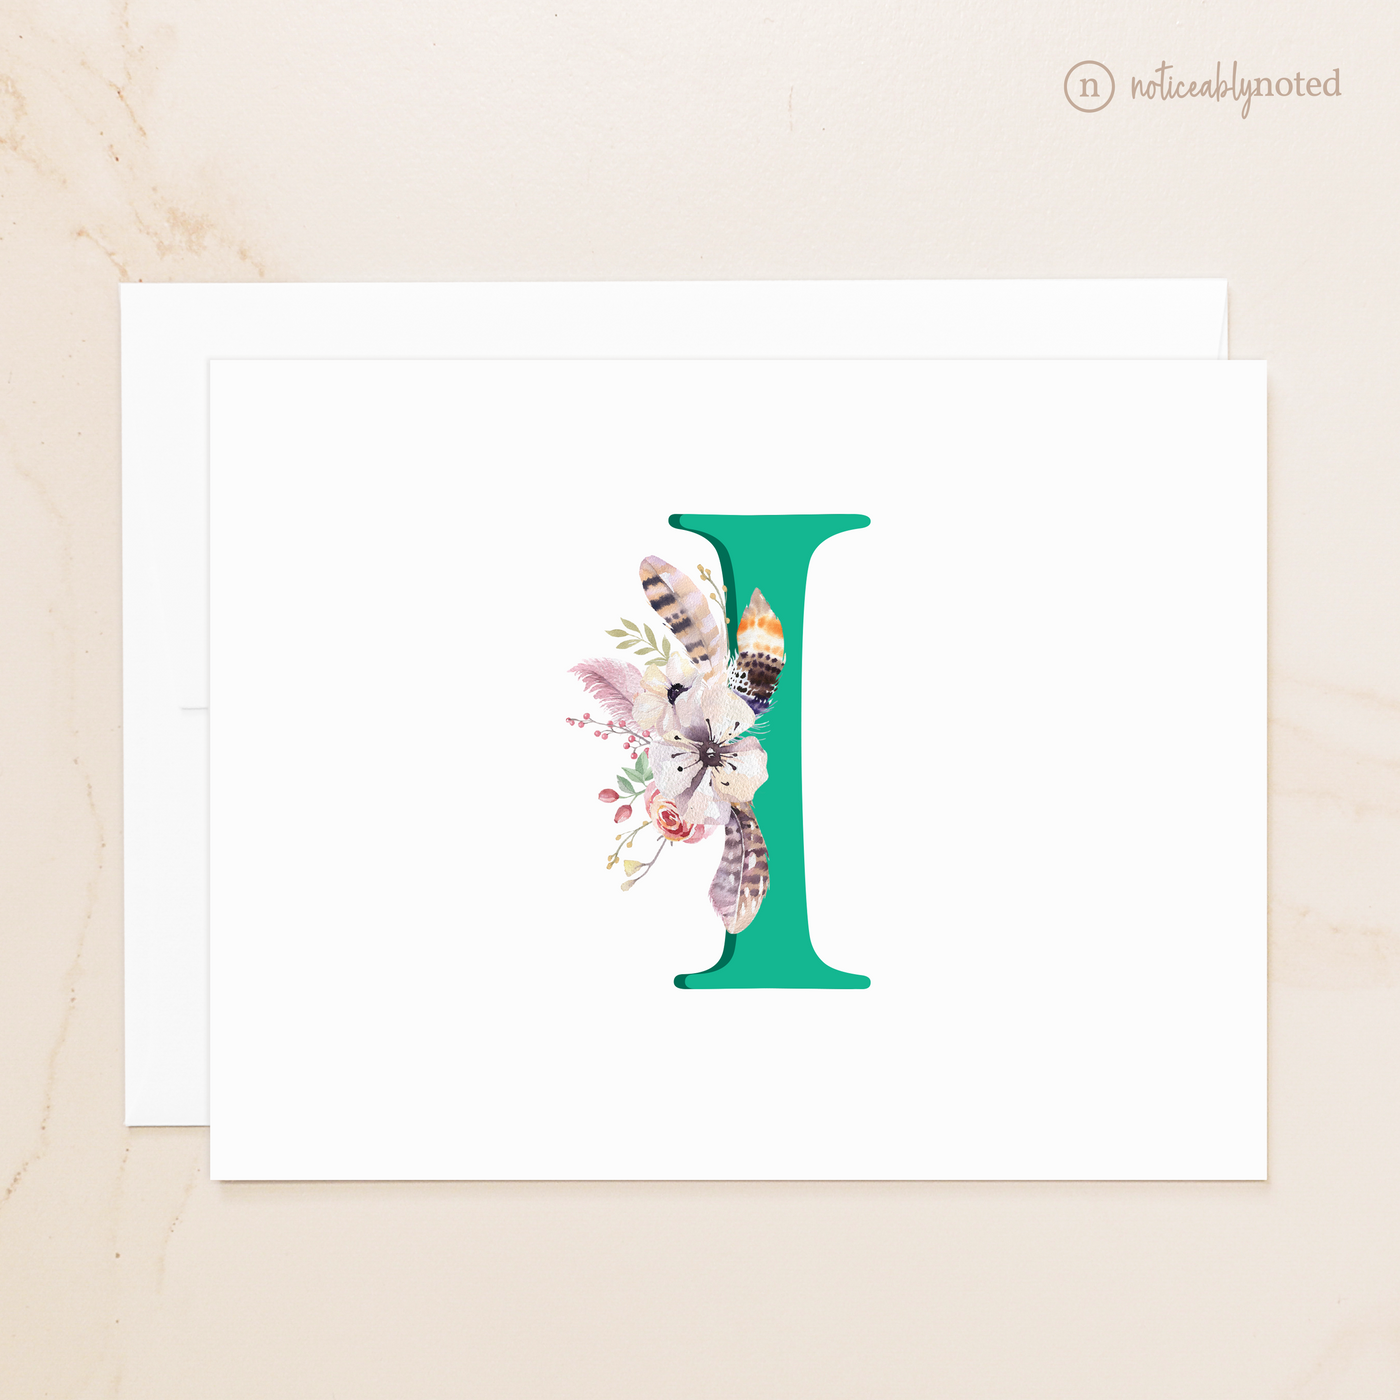 Monogrammed Note Cards | Noticeably Noted